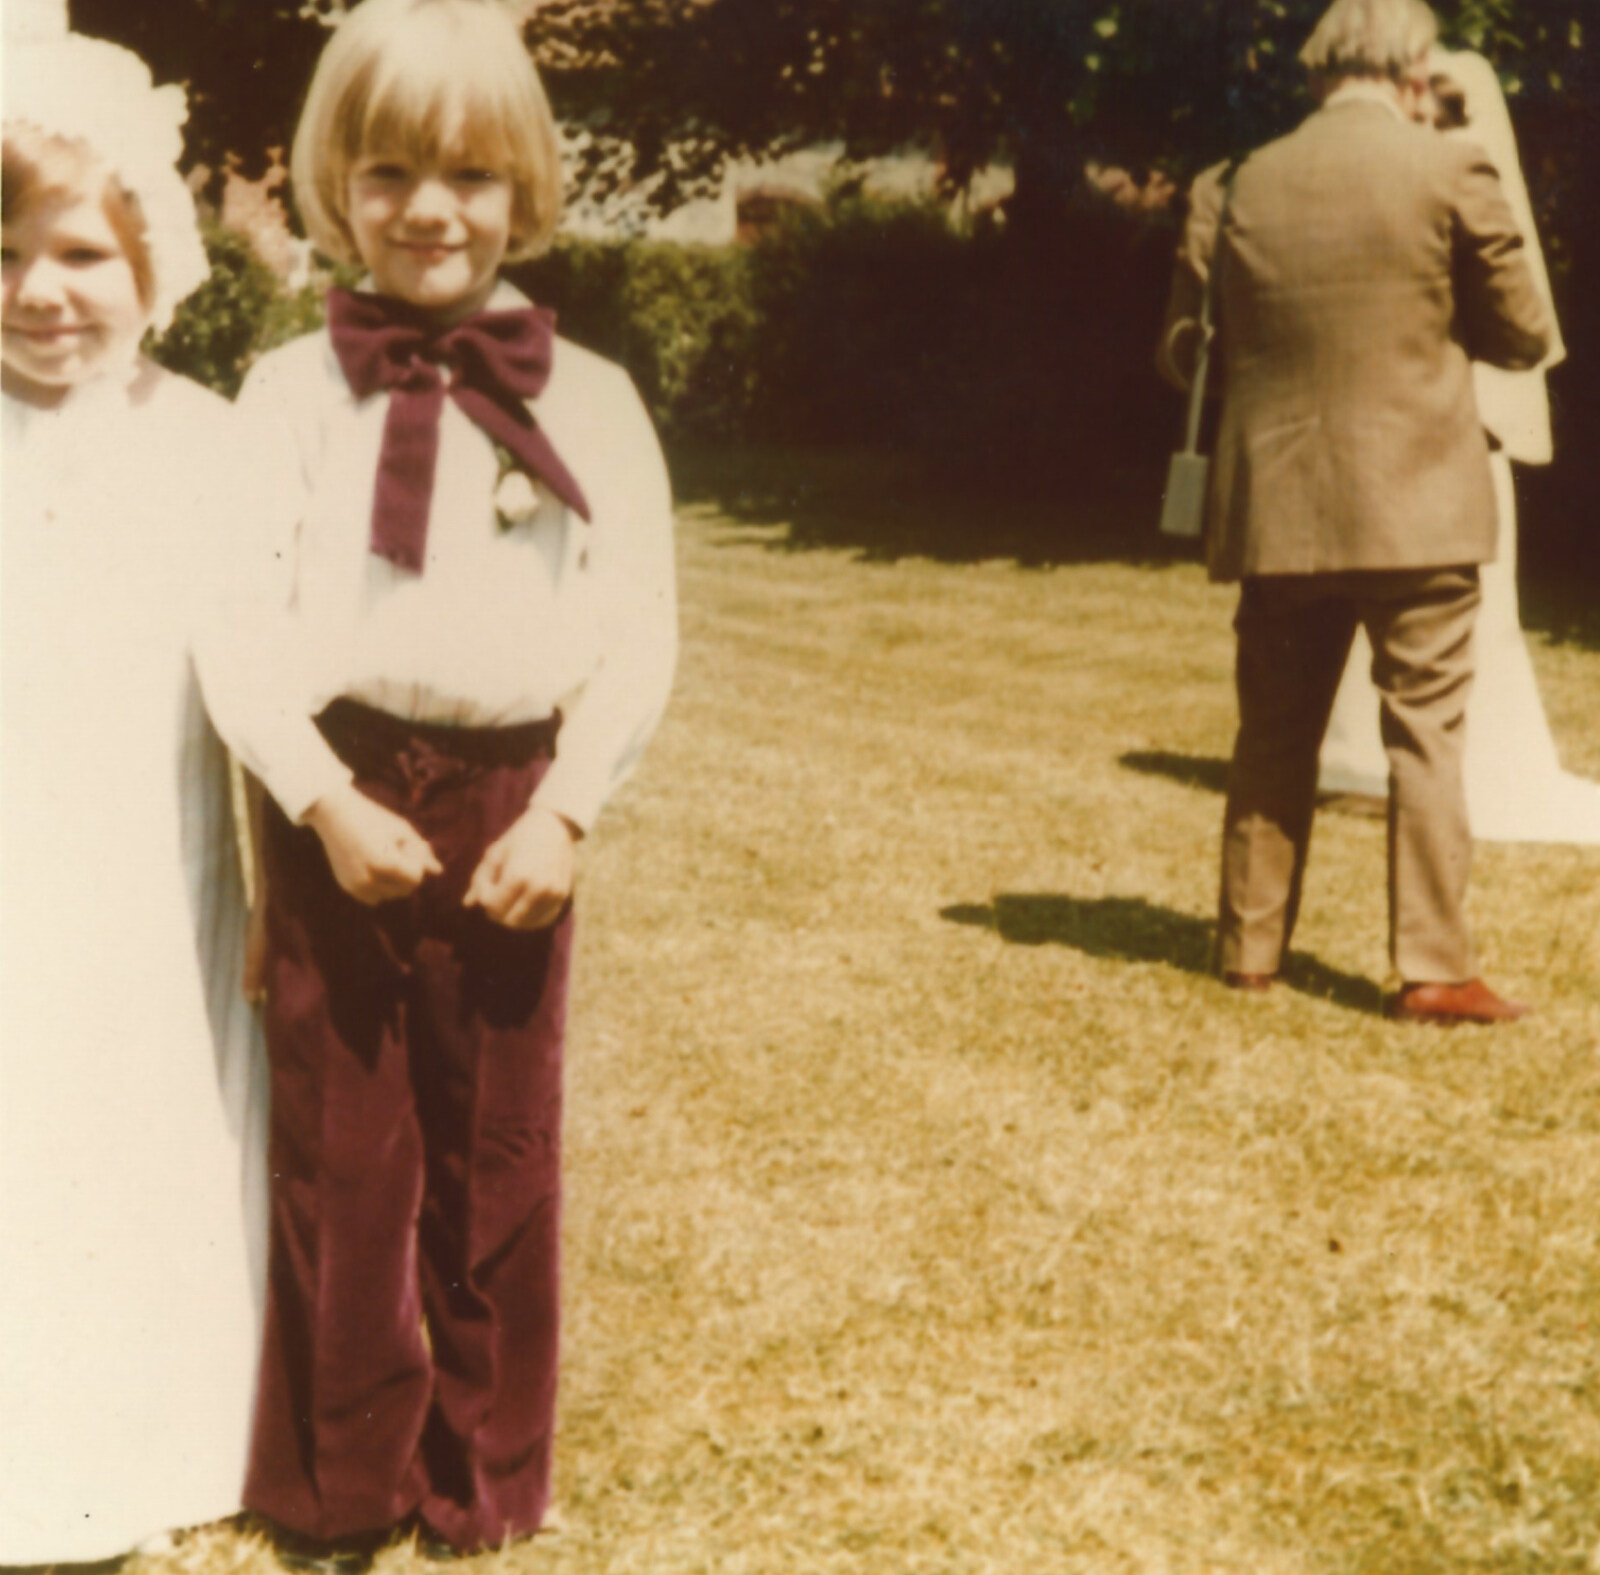 Family History: The 1970s, Timperley and Sandbach, Cheshire - 24th January 2020: Purple velvet pageboy